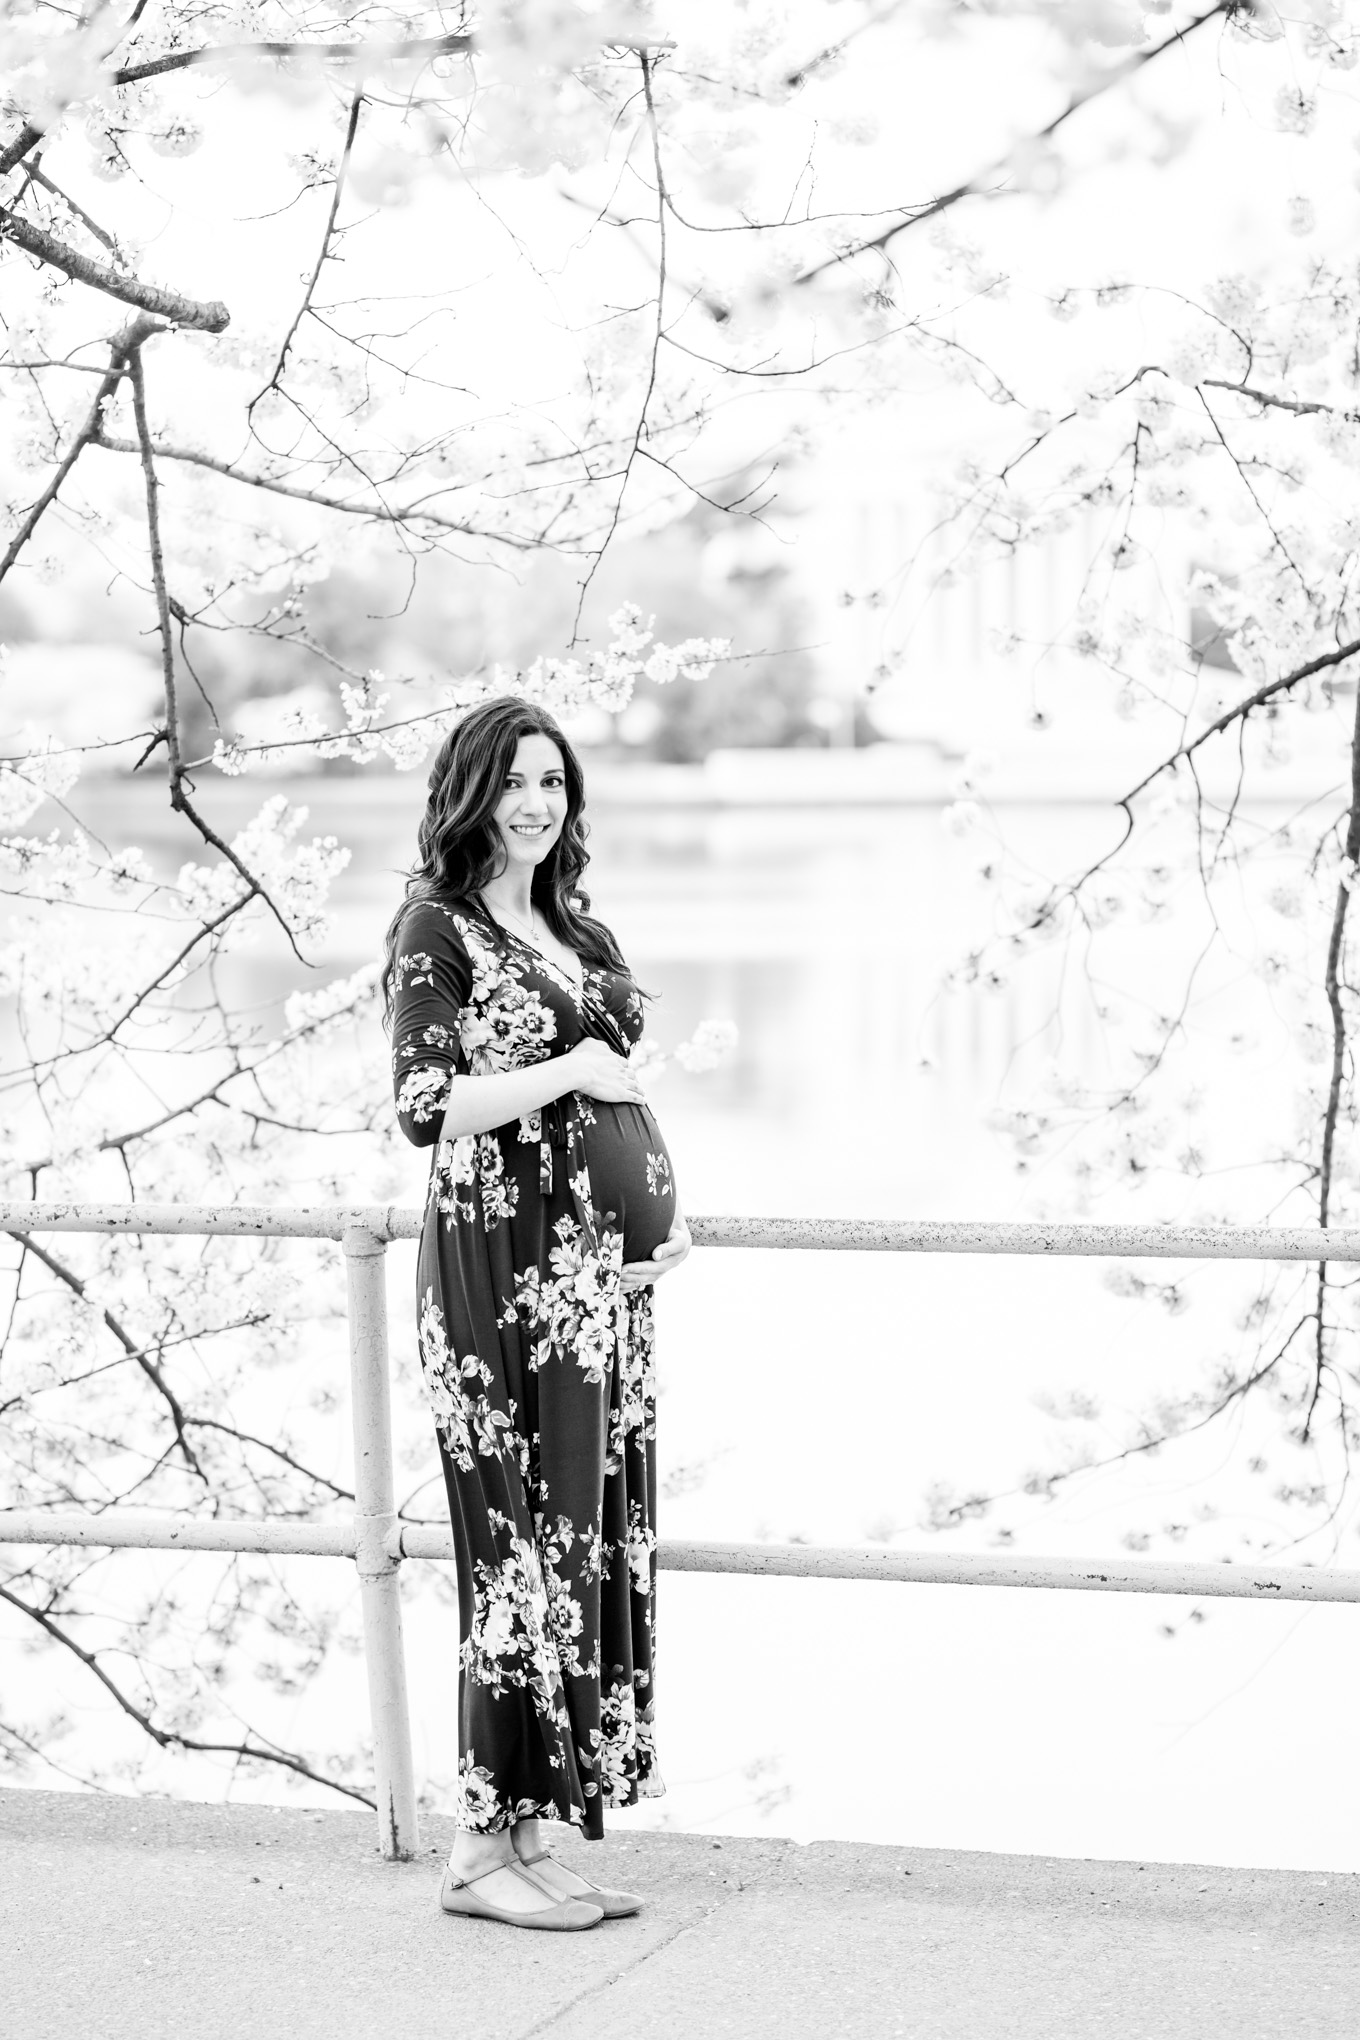 D.C. cherry blossoms maternity session, maternity portraits, maternity photos, D.C. cherry blossoms, cherry blossoms maternity photo, floral print top, brunette expectant mom, expecting mother, brunette woman, pregnant woman, third trimester, baby bump, cherry blossom print dress, black and white portrait, floral frame, Jefferson Memorial